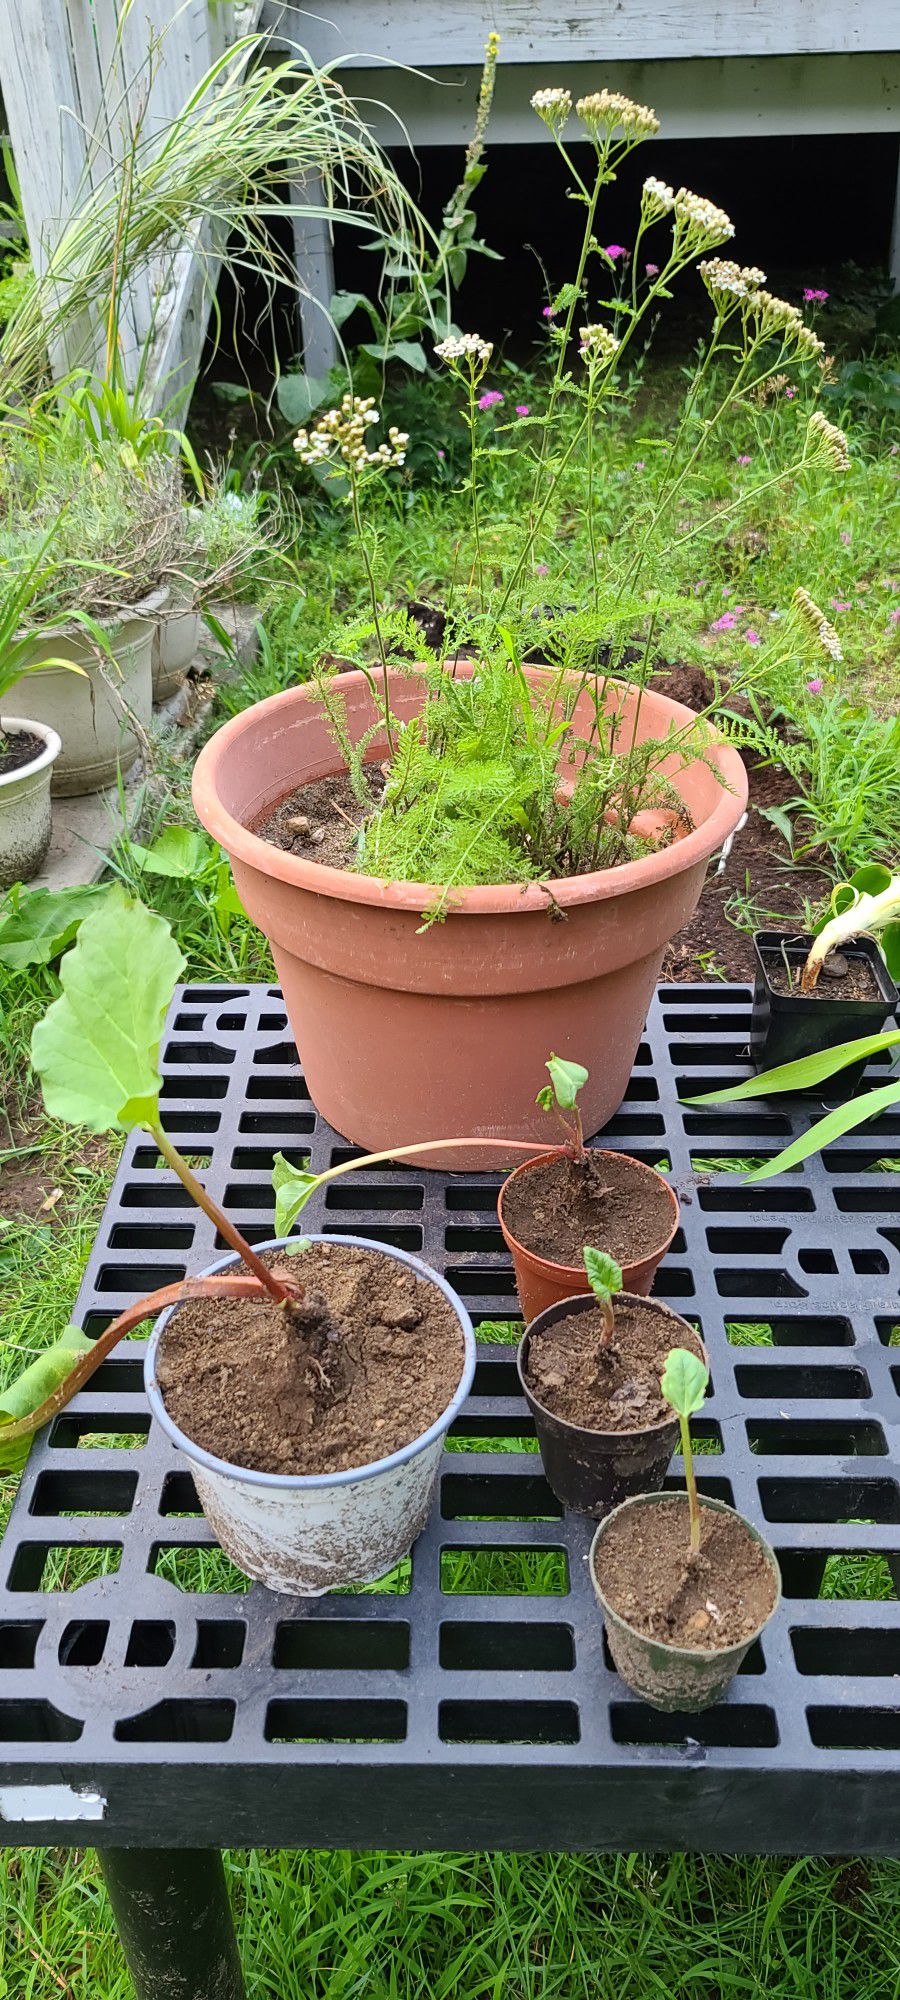 Live Potted Plant Sale All Perennials Bamboo,  Water Plants, Rhubarb,  Peonies,  Hostas